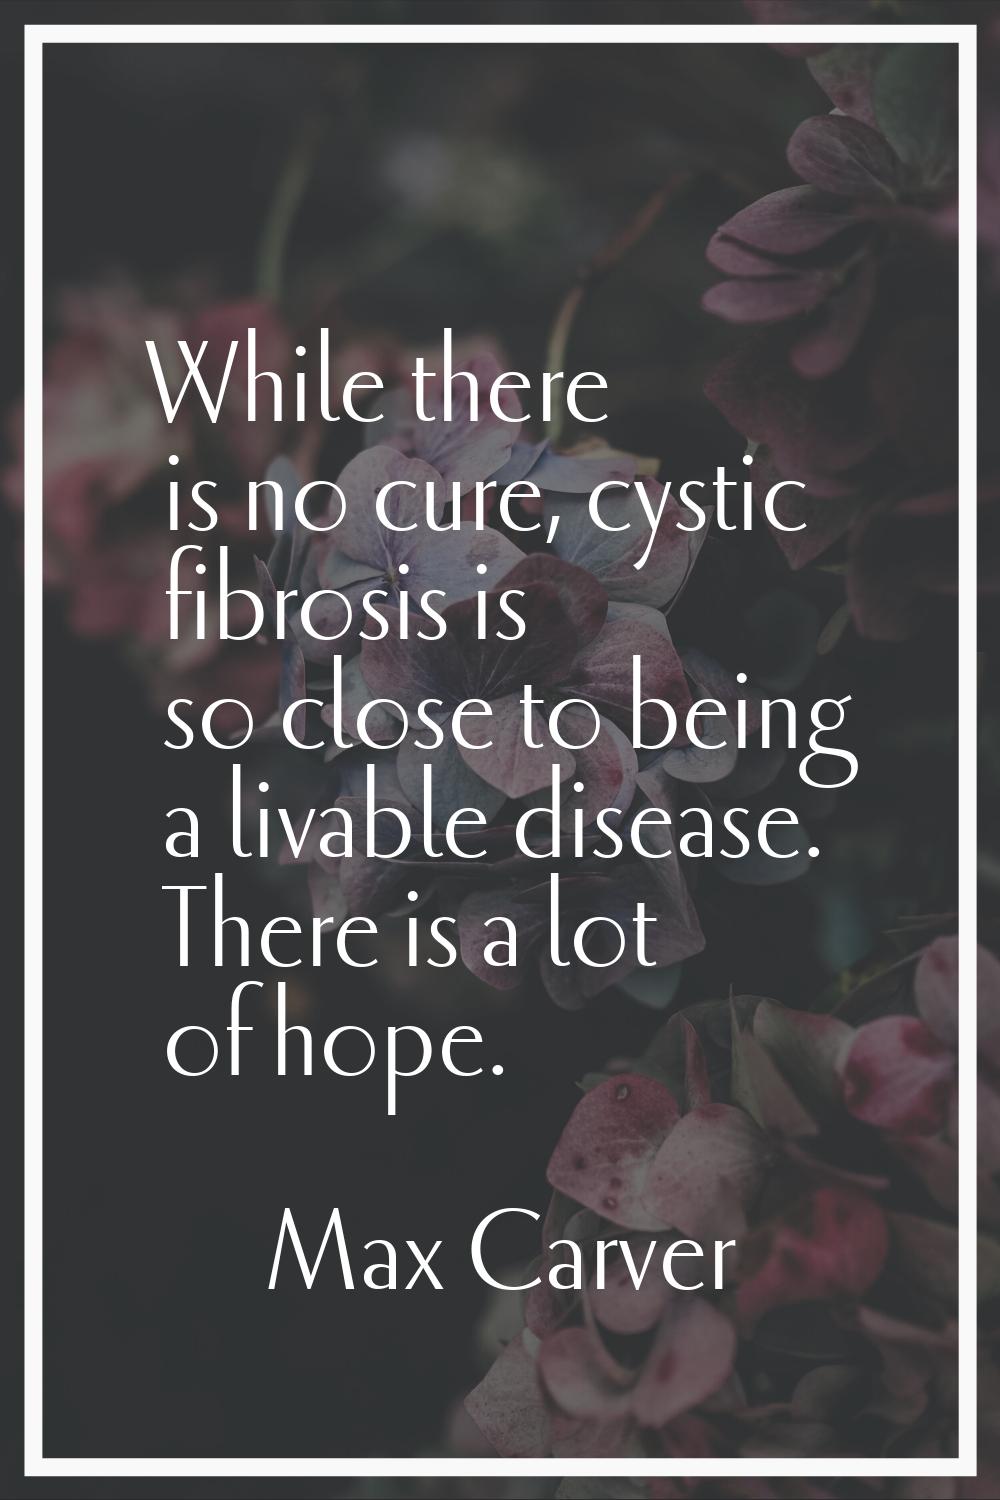 While there is no cure, cystic fibrosis is so close to being a livable disease. There is a lot of h